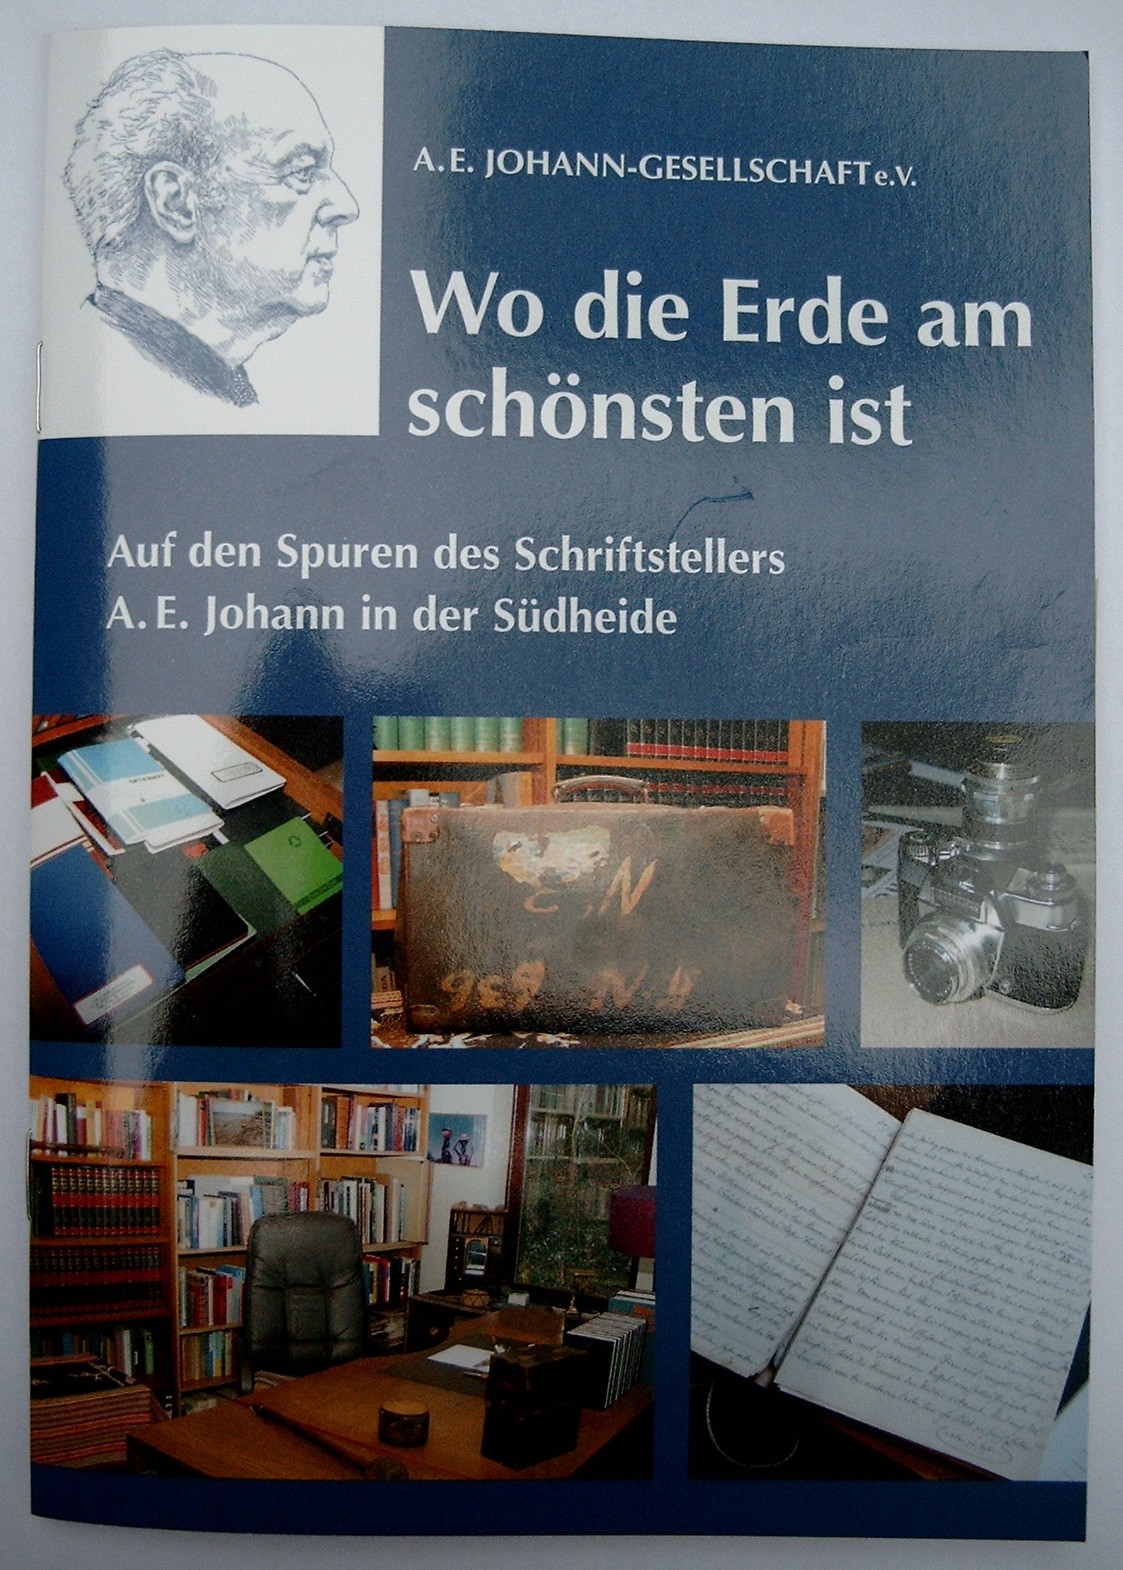 Just published from the A.E.Johann-(Society) Gesellschaft e.V.